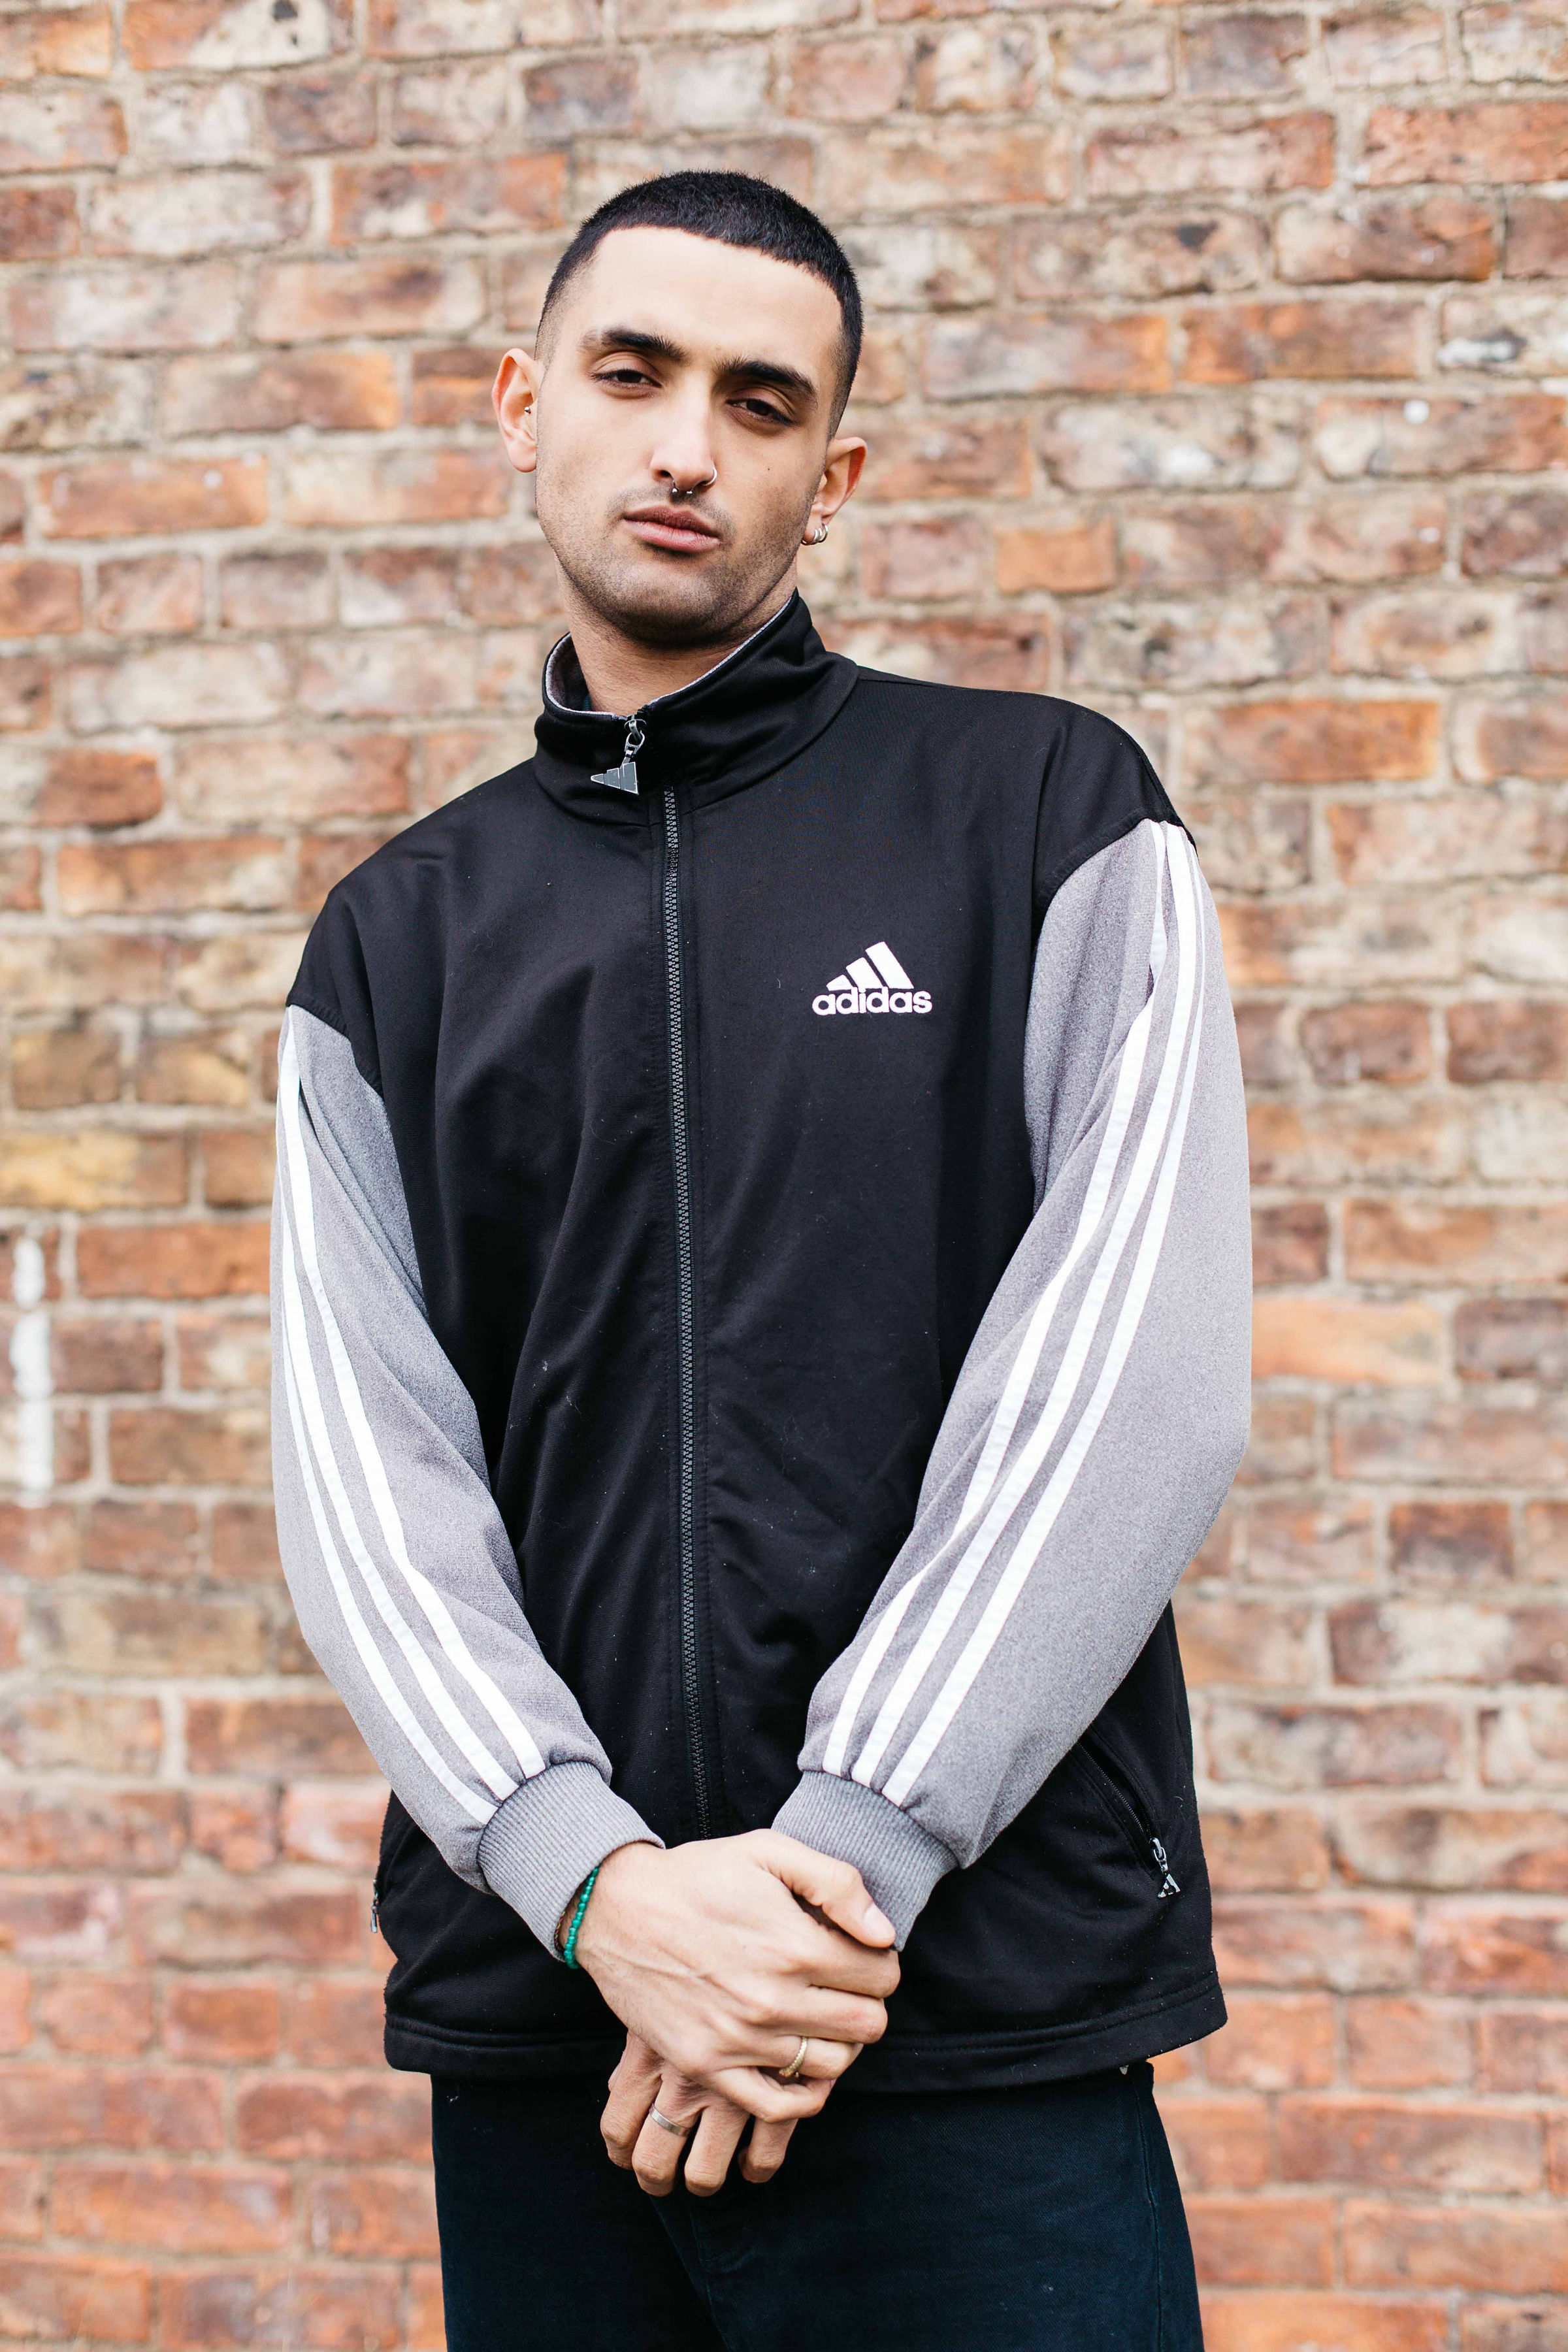 adidas Contact Top in Black, Jackets